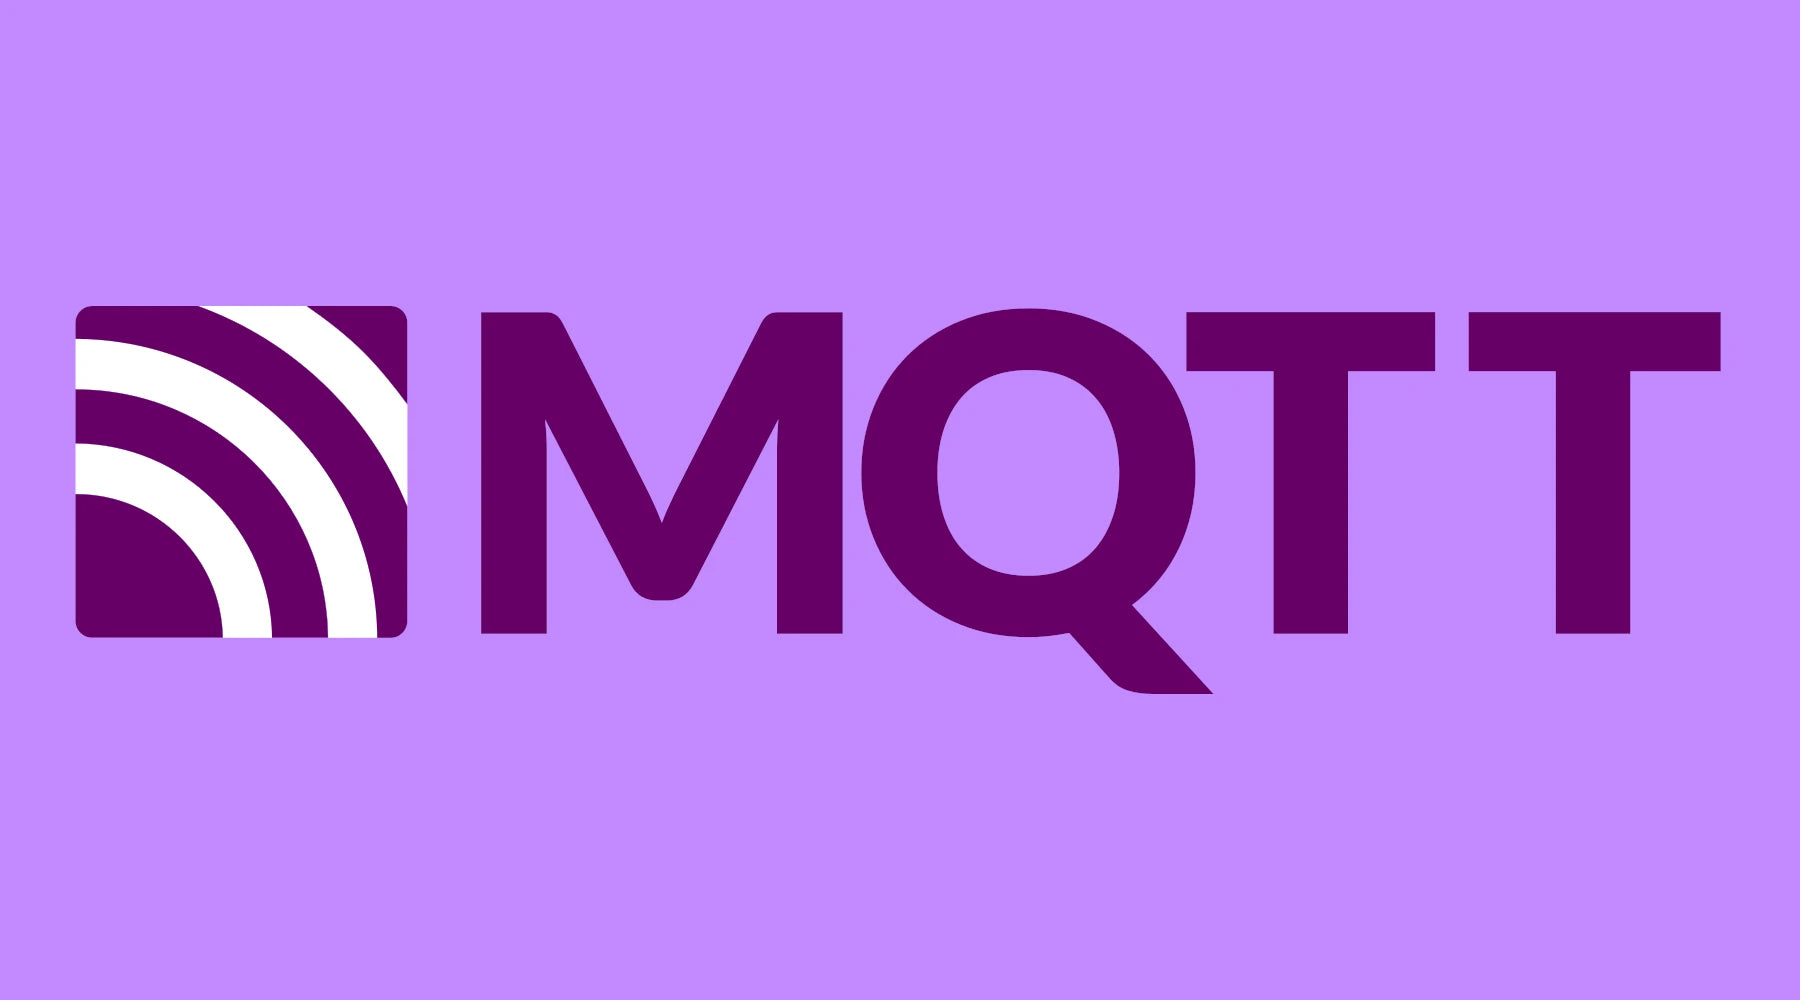 What is MQTT?